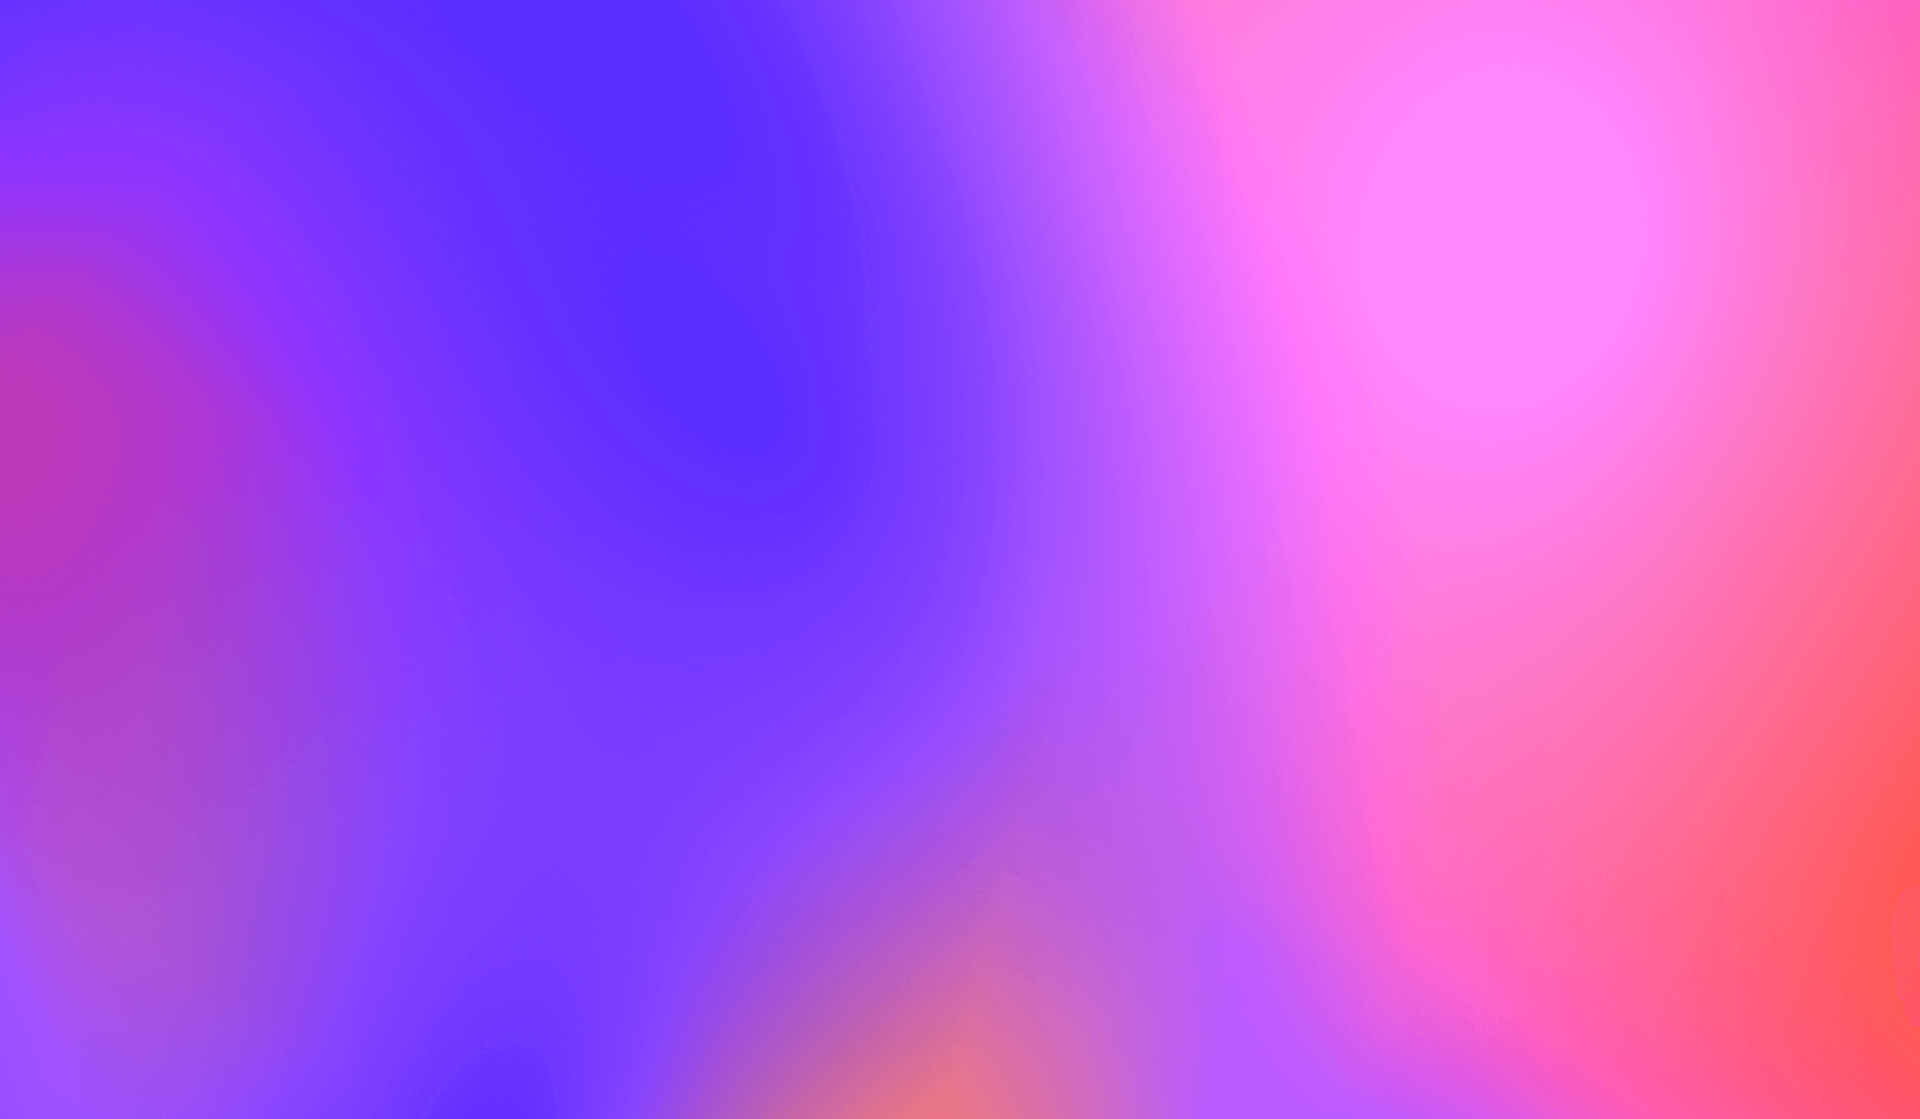 blue and red background gradient image